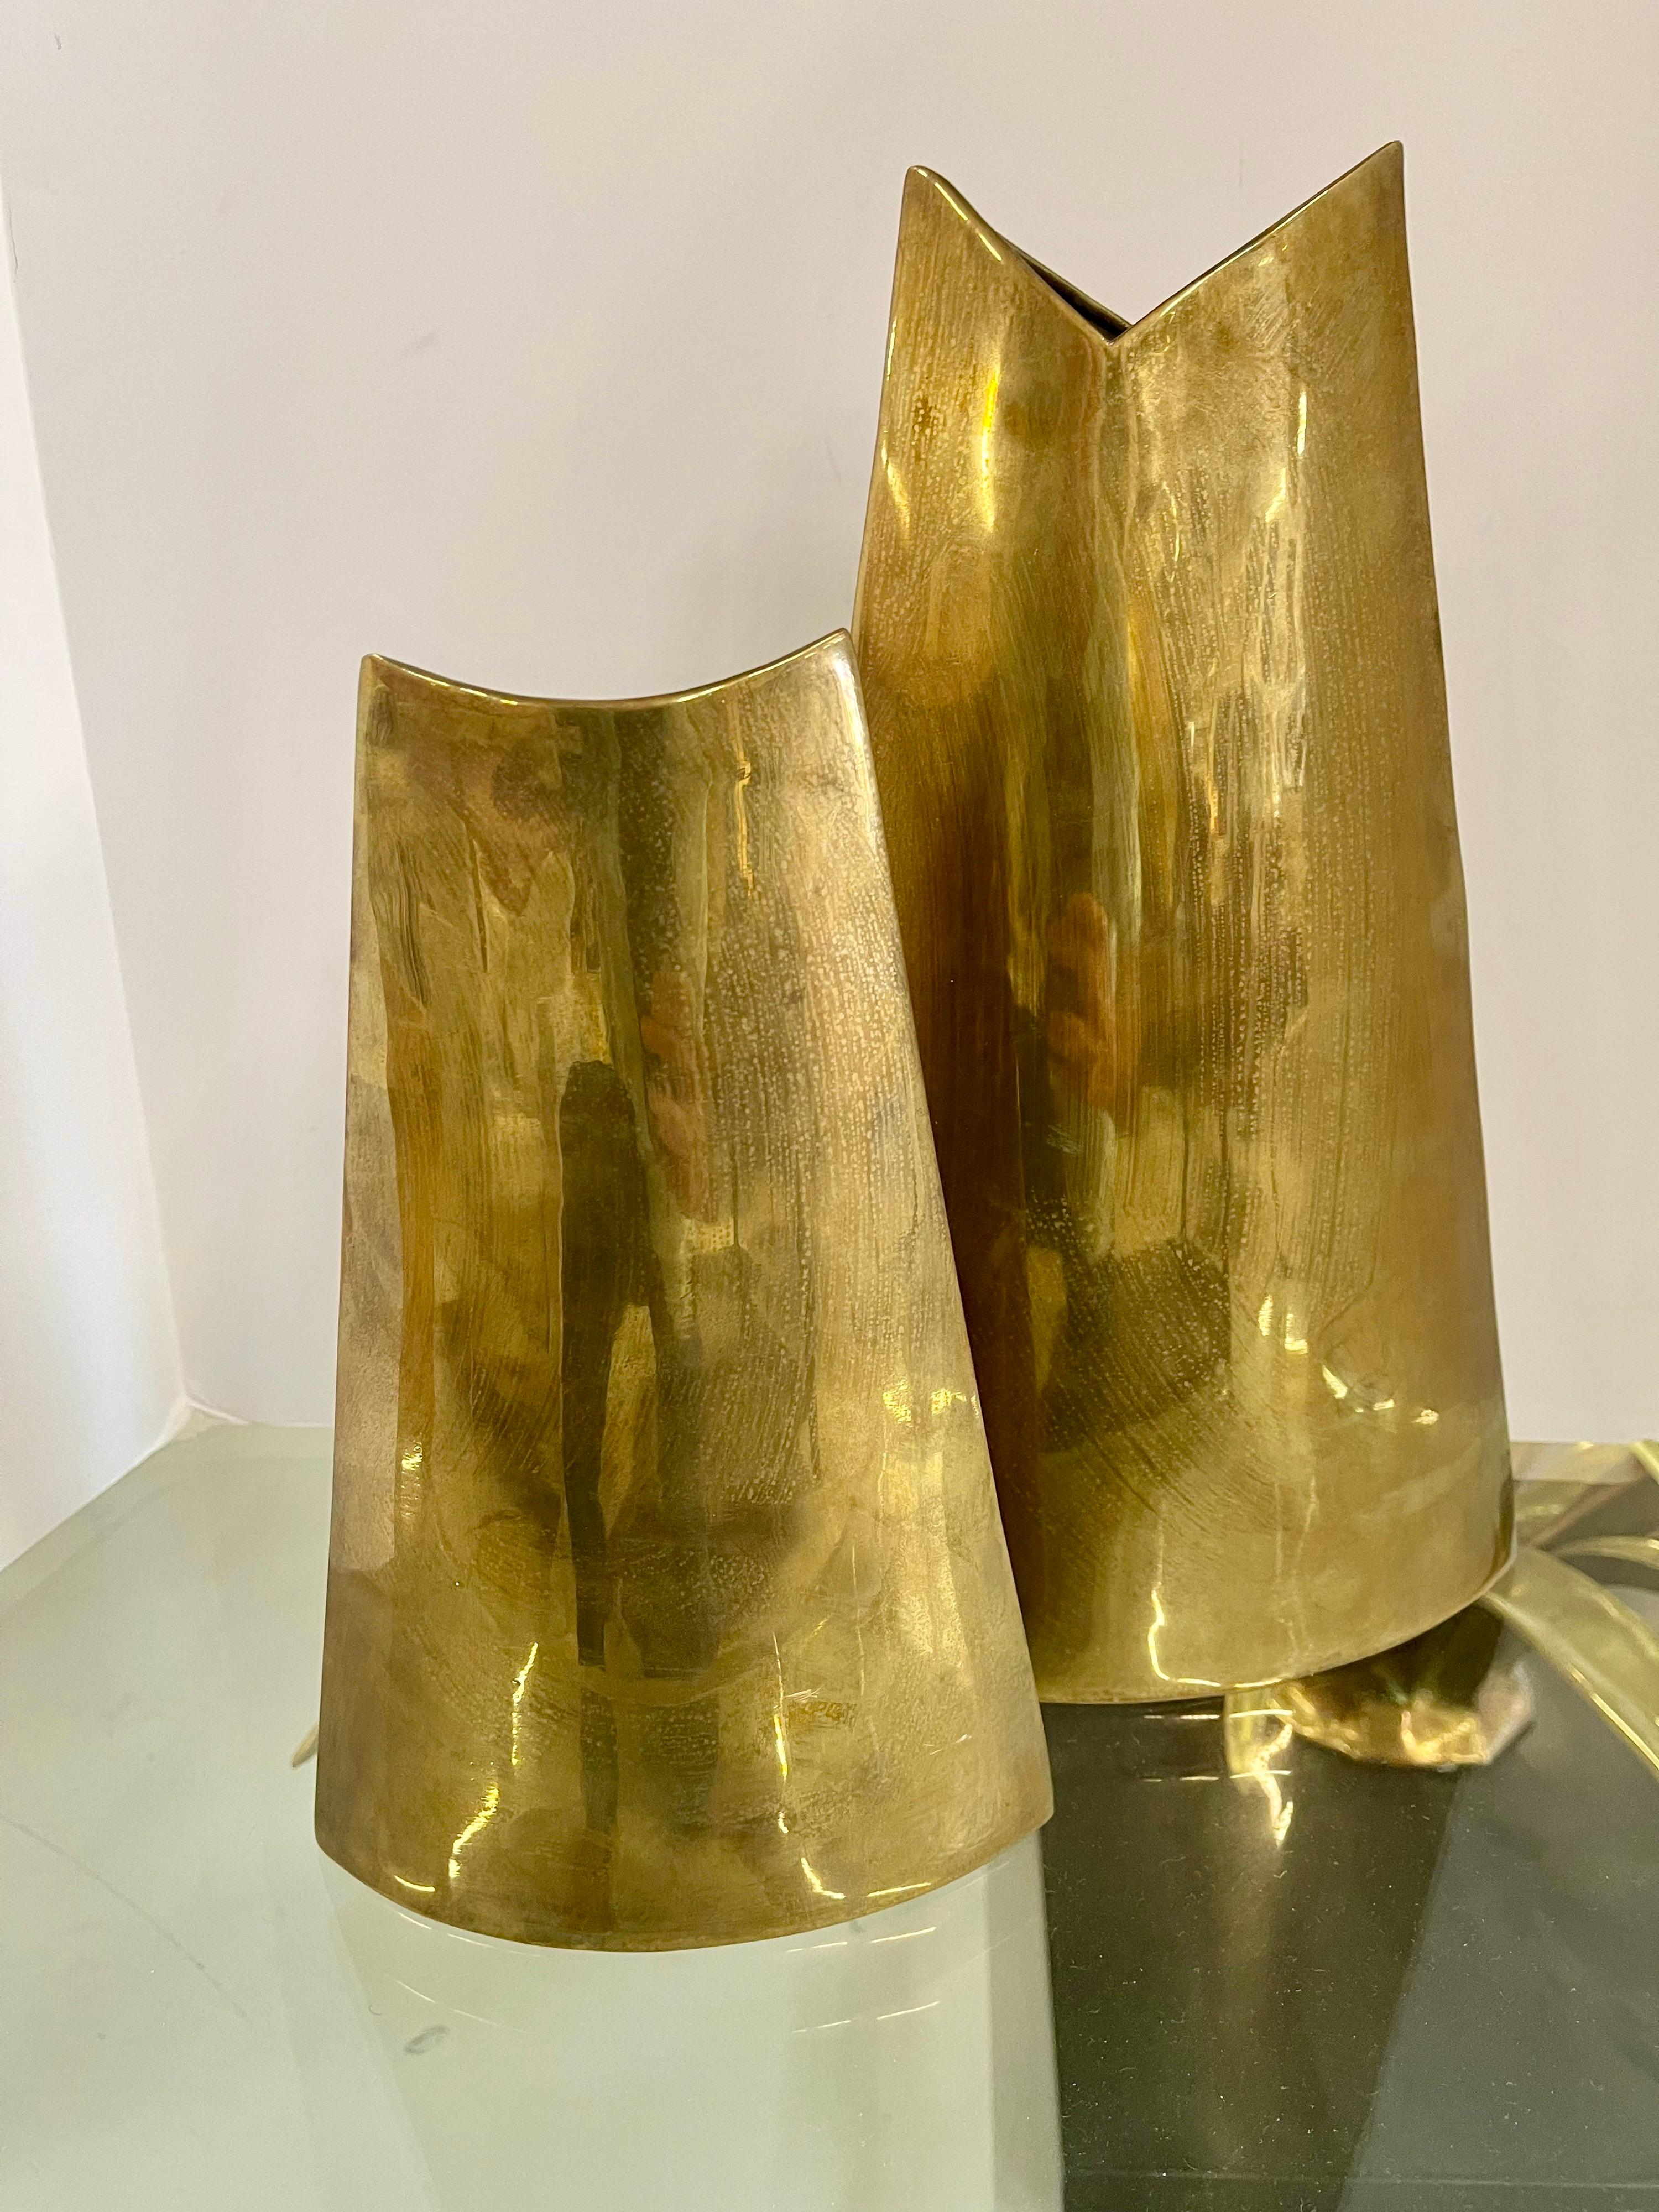 Pair of James Johnston brass vases. Interesting shapes that complement each other. The taller one is approximately 13 1/2 inches tall. The smaller is 10 inches tall. Both are impressed on the base. These both have tarnishing and some marks and